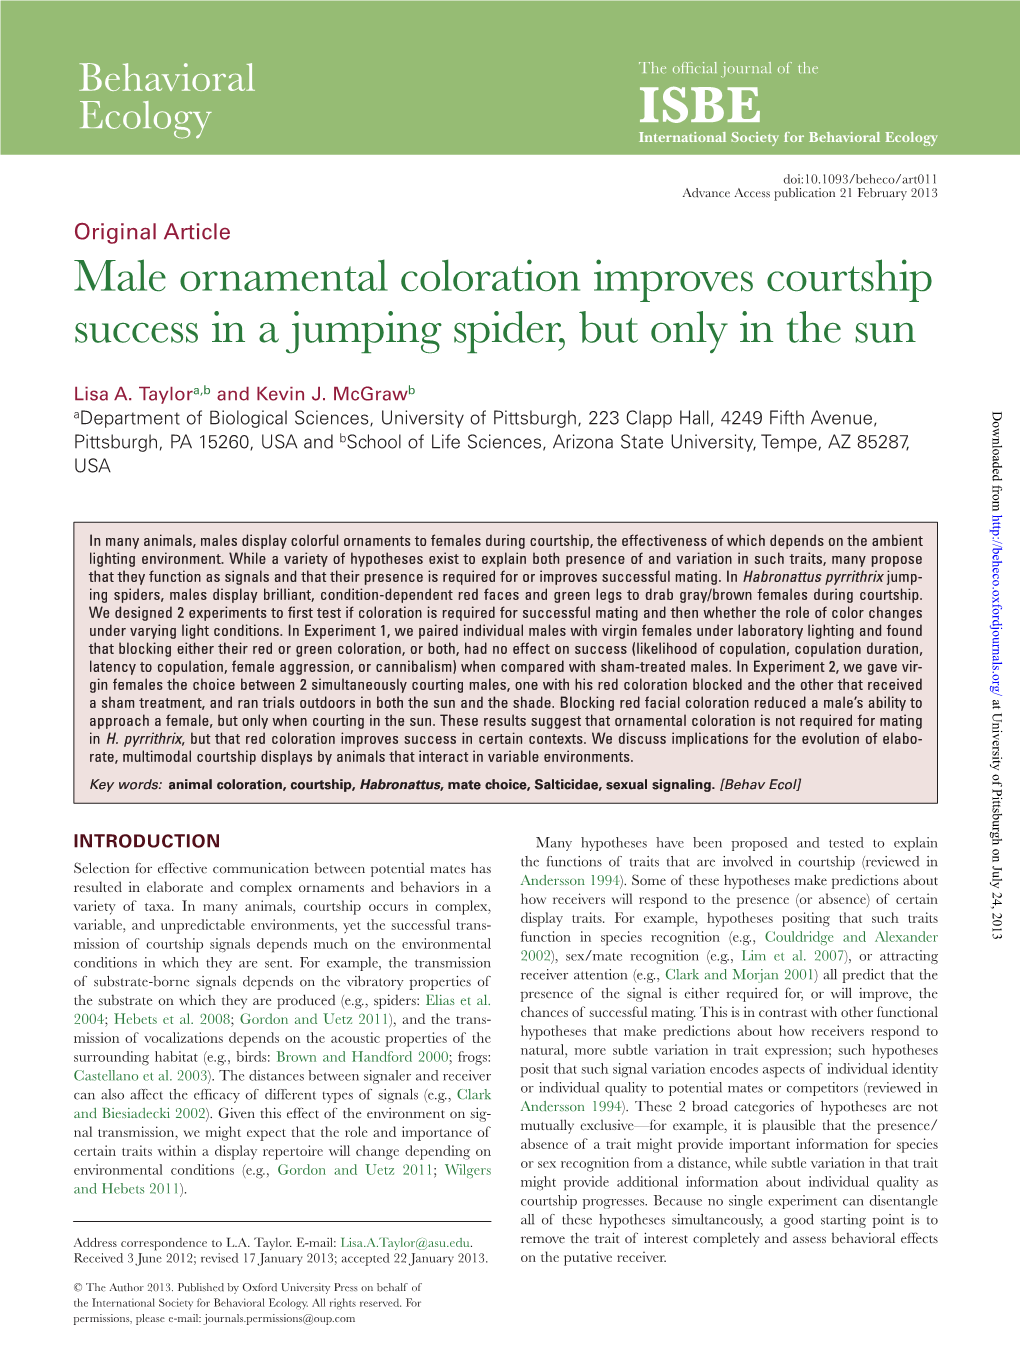 Male Ornamental Coloration Improves Courtship Success in a Jumping Spider, but Only in the Sun